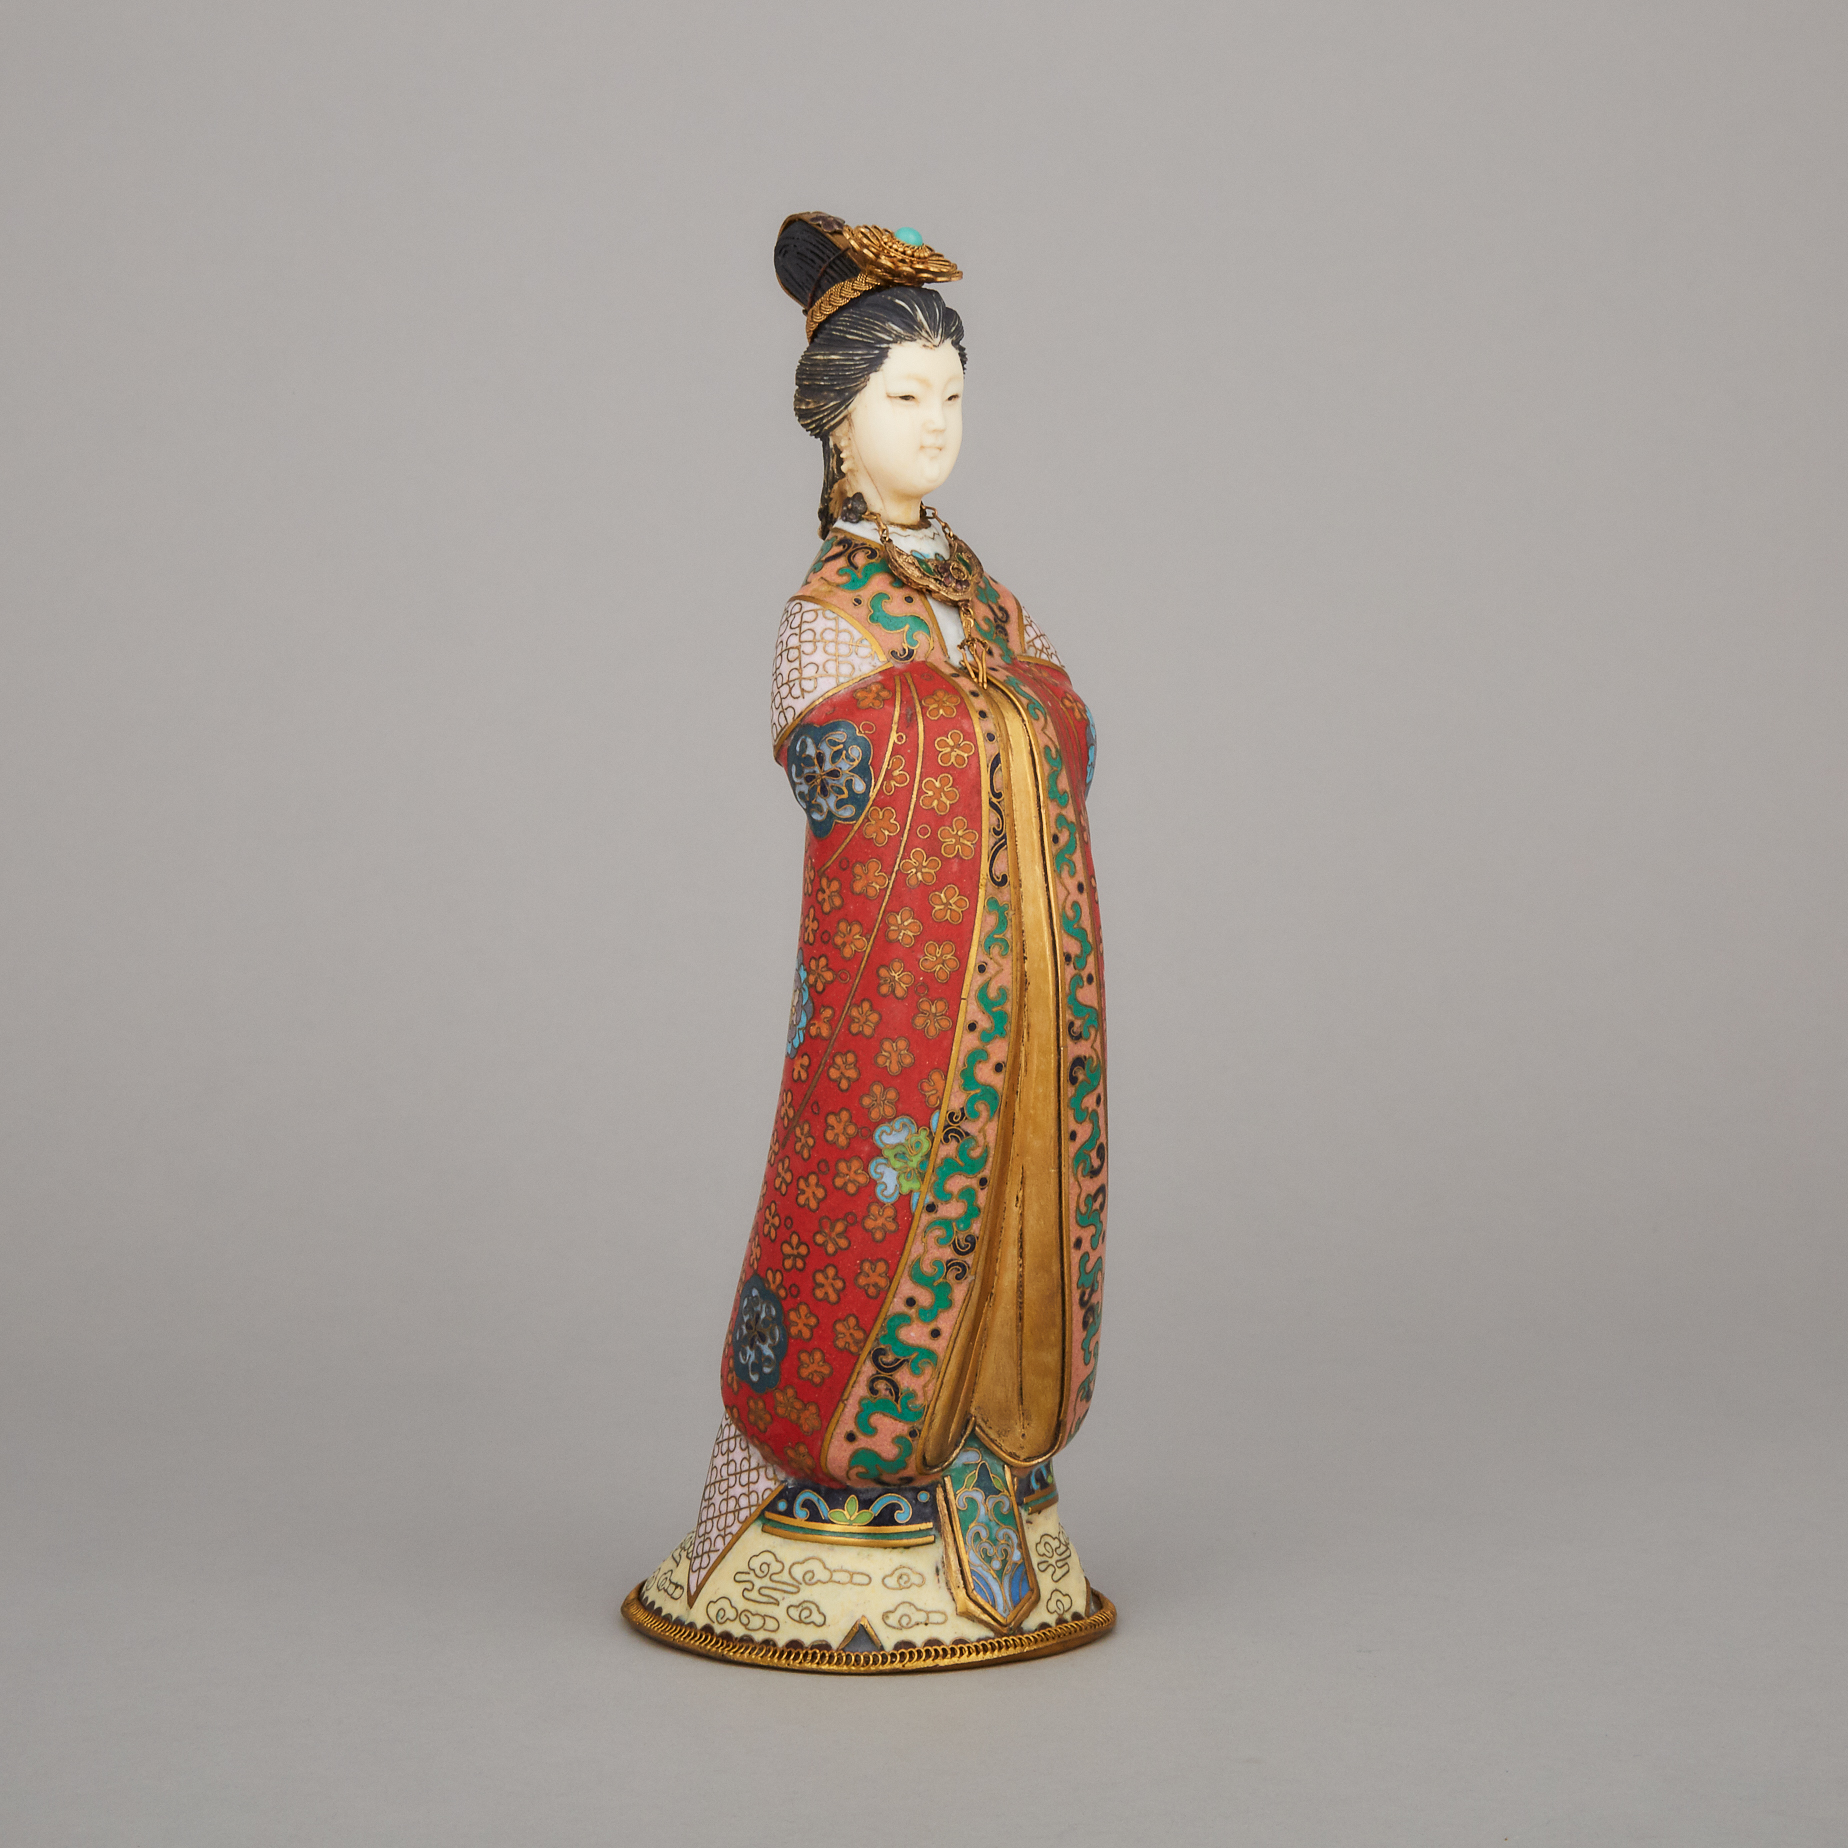 A Chinese Cloisonné Figure of a Lady, Mid-20th Century